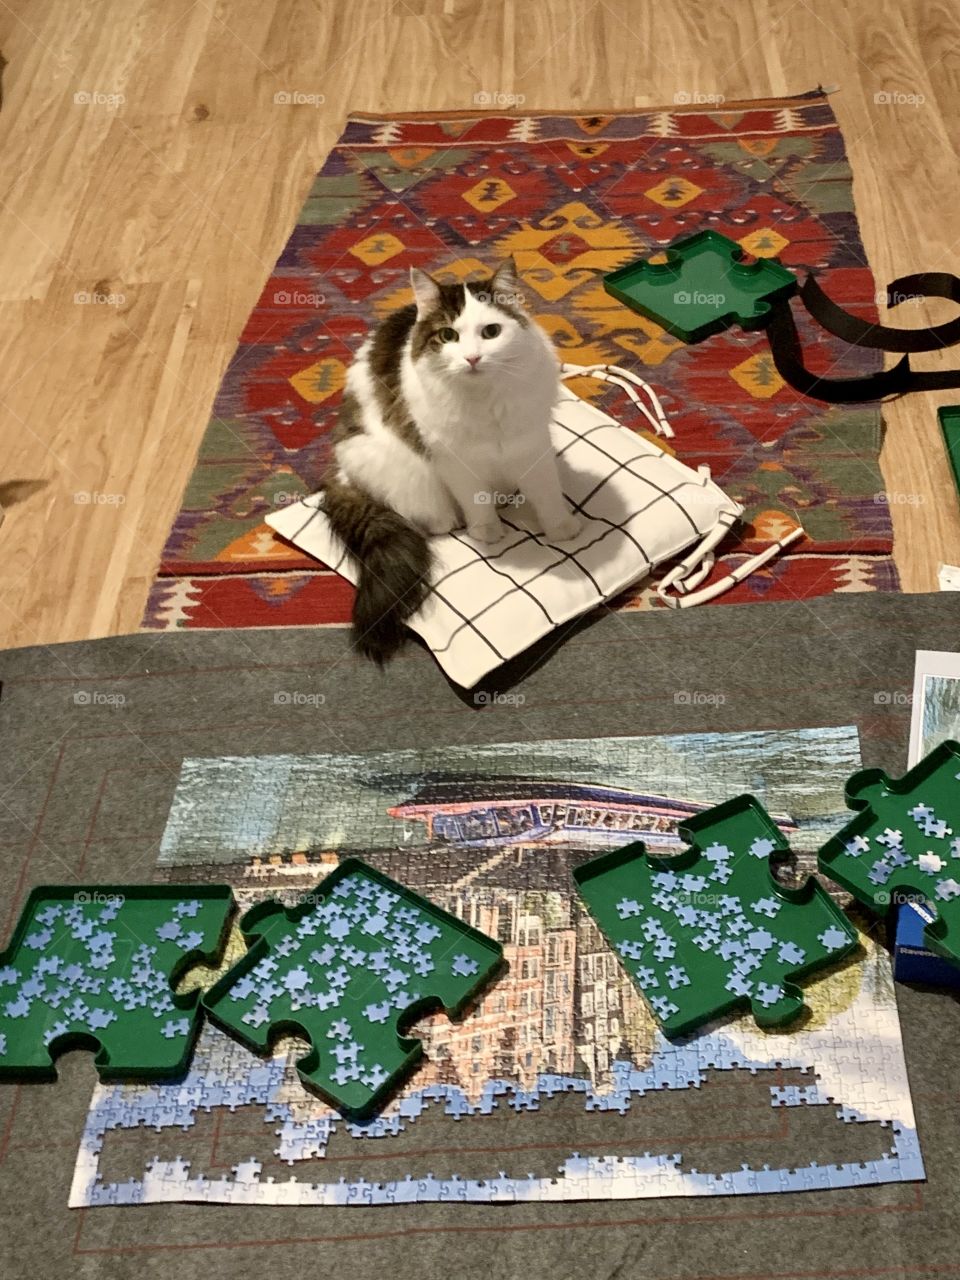 Cat sitting by the puzzle